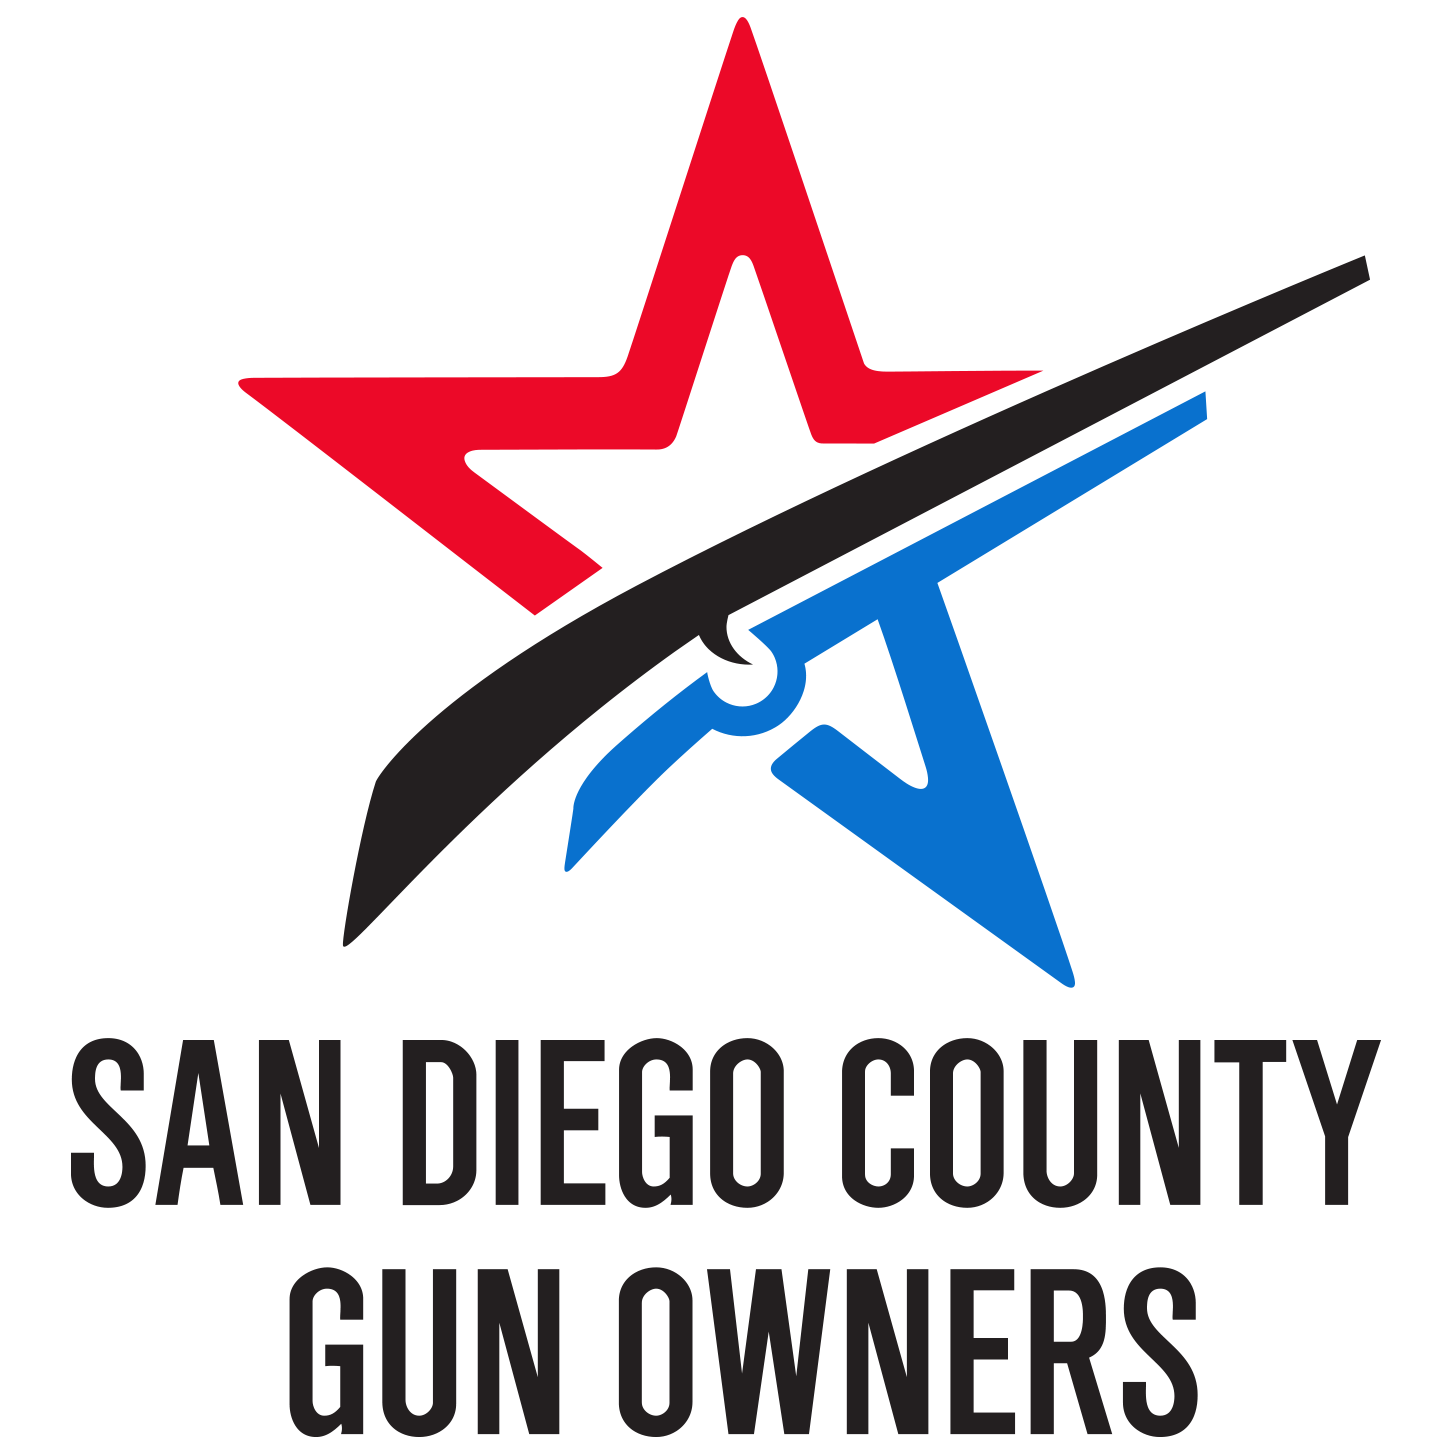 Weekly Email 11/12/2020: 2A Discussion Night Live Tonight! On Line Auction / Monthly Meeting / CCW Seminar